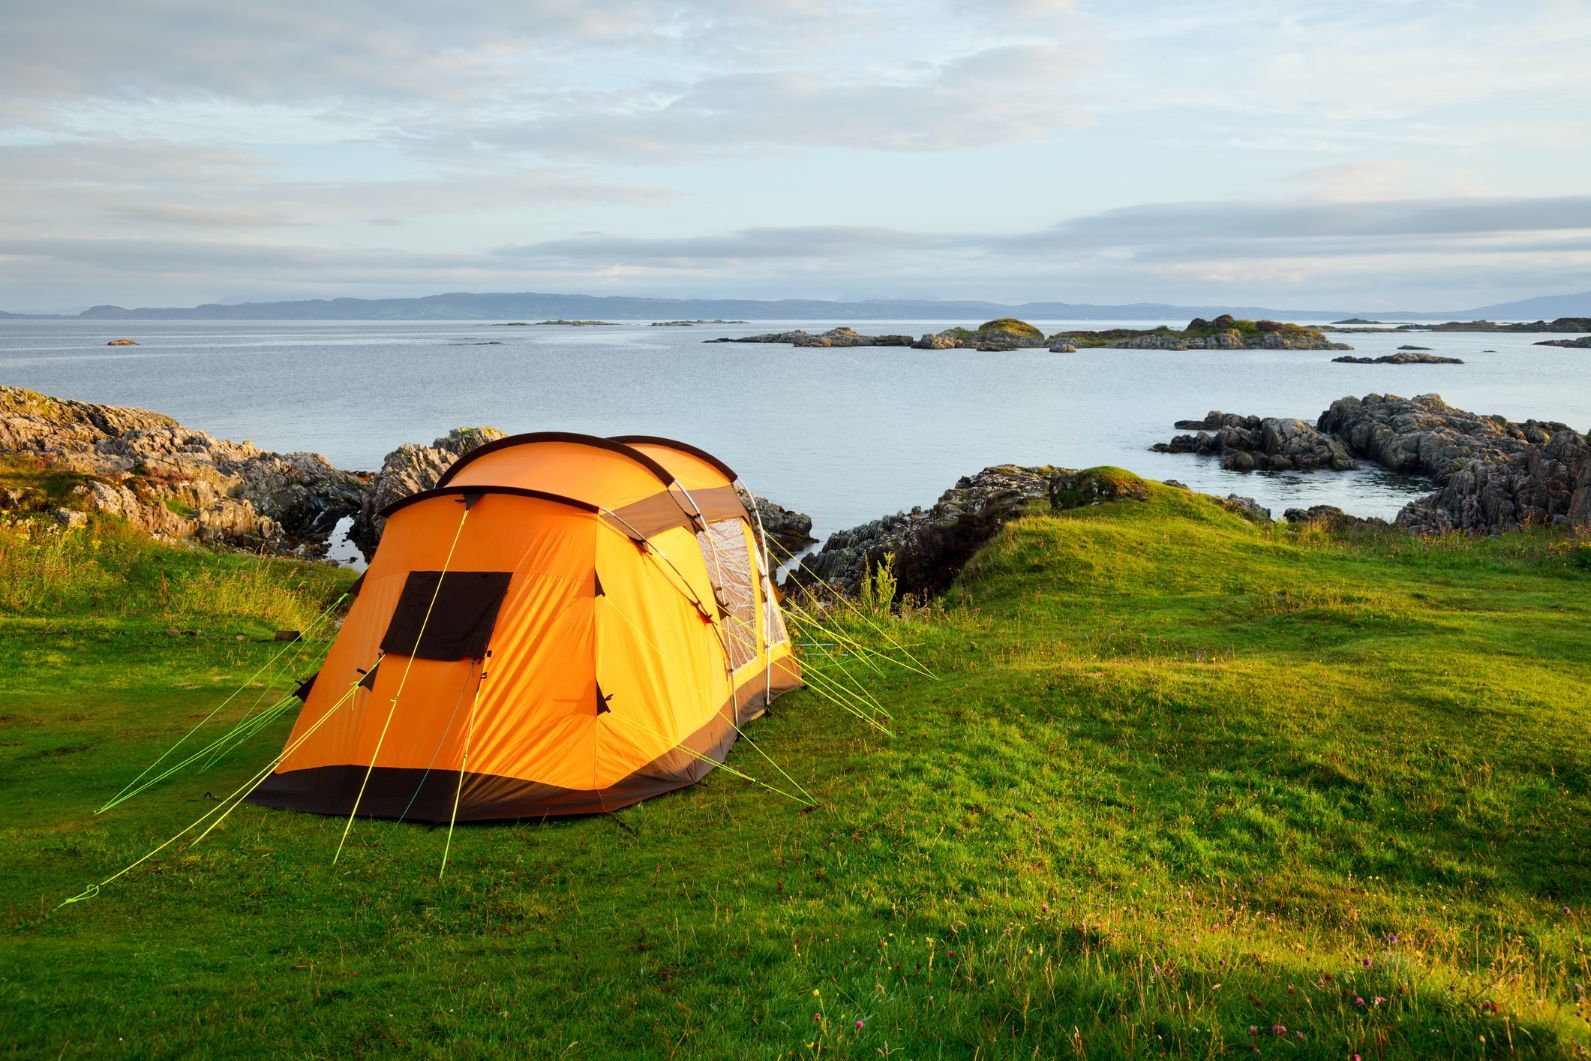 A yellow tent with guy ropes pegged sits on the edge of the Scottish coast.